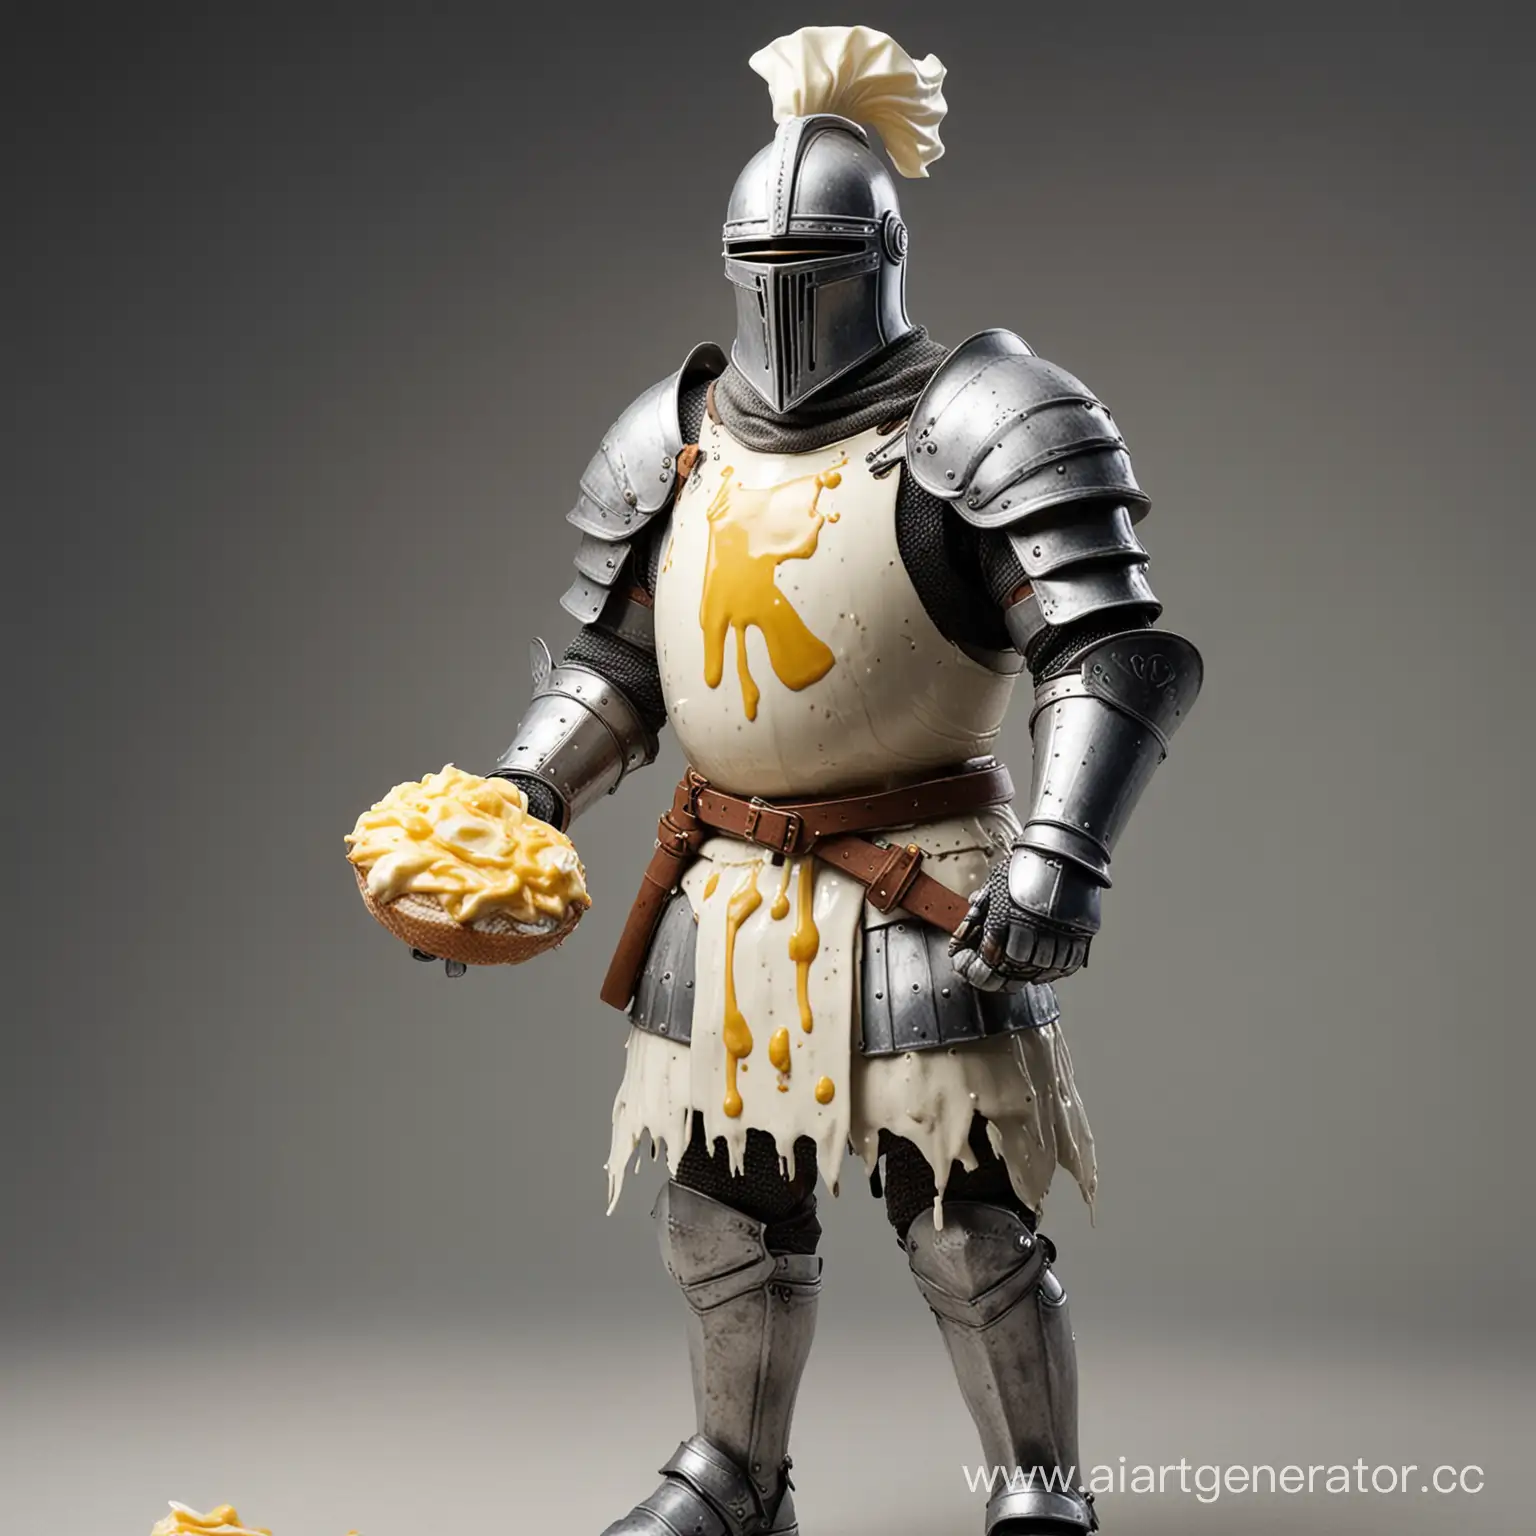 Medieval-Knight-Smothered-in-Mayonnaise-Battle-Sauce